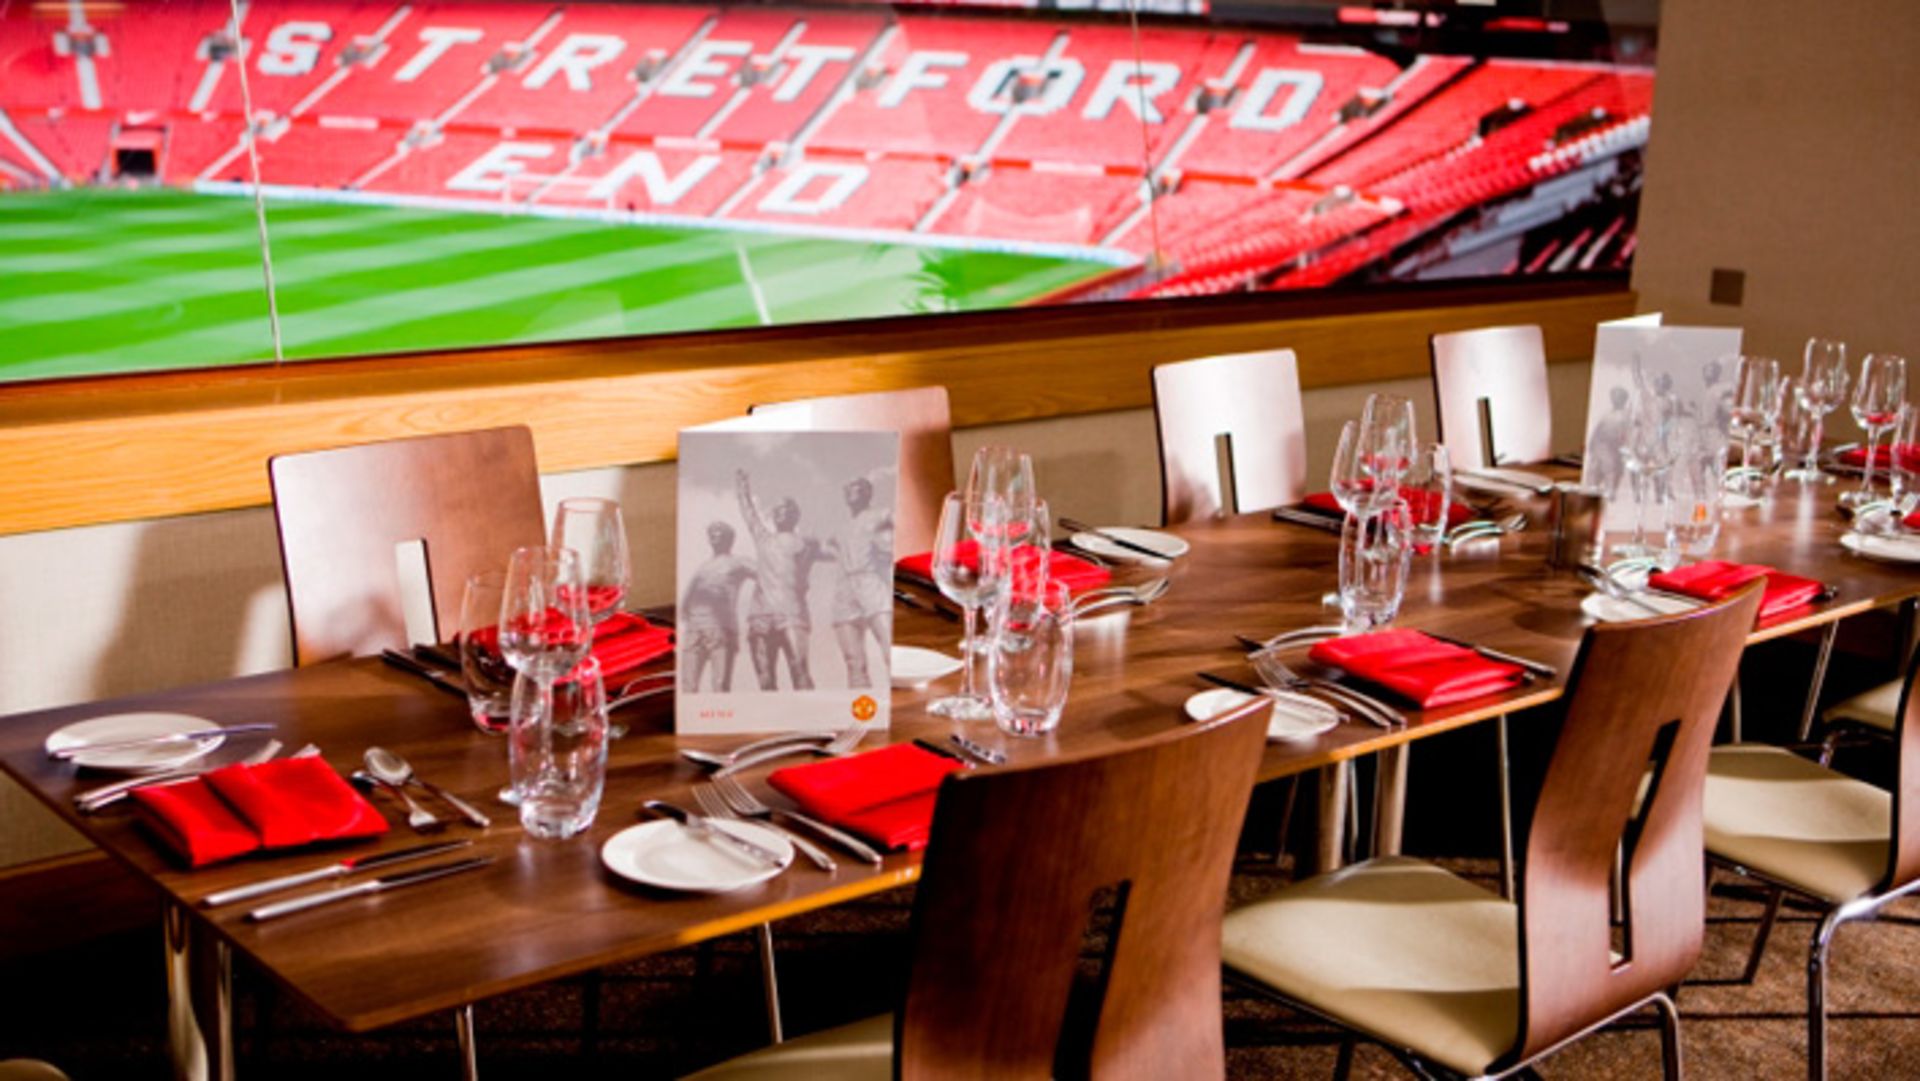 VIP Guests of Manchester United donate VIP Hospitality Experience for Four